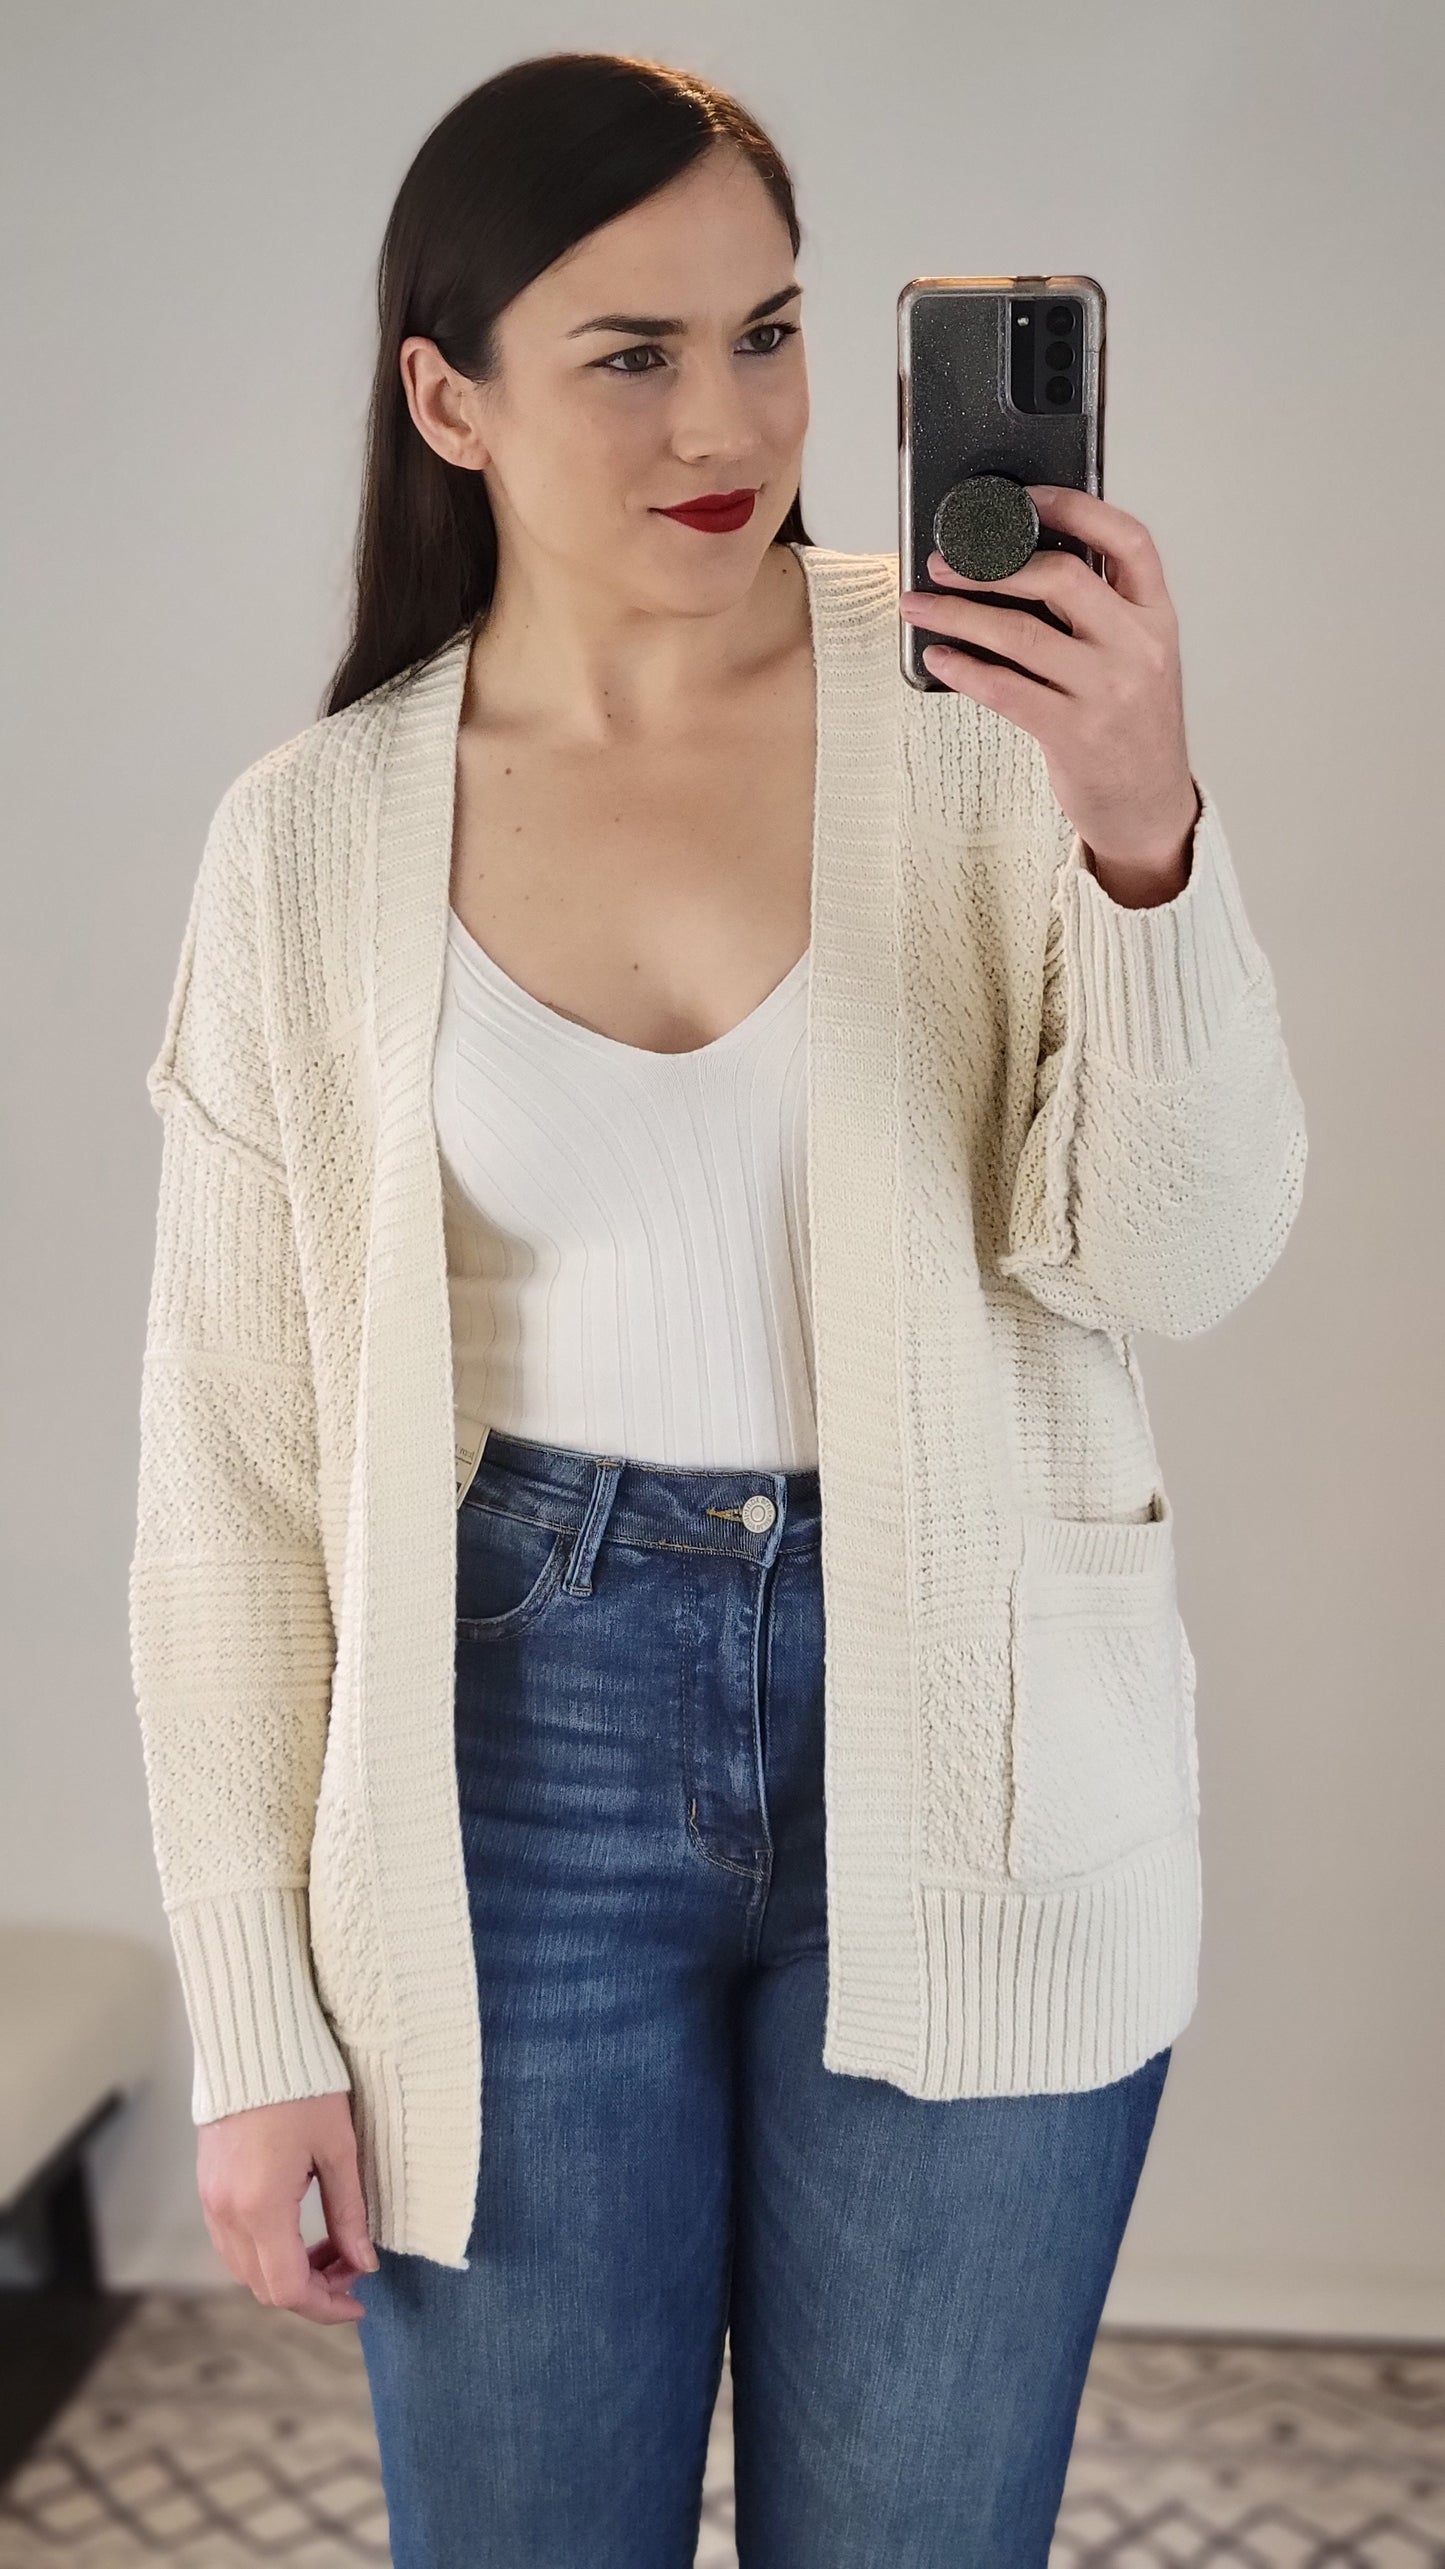 Oatmeal Perfect Knit Cardigan with Pockets "Lillie"